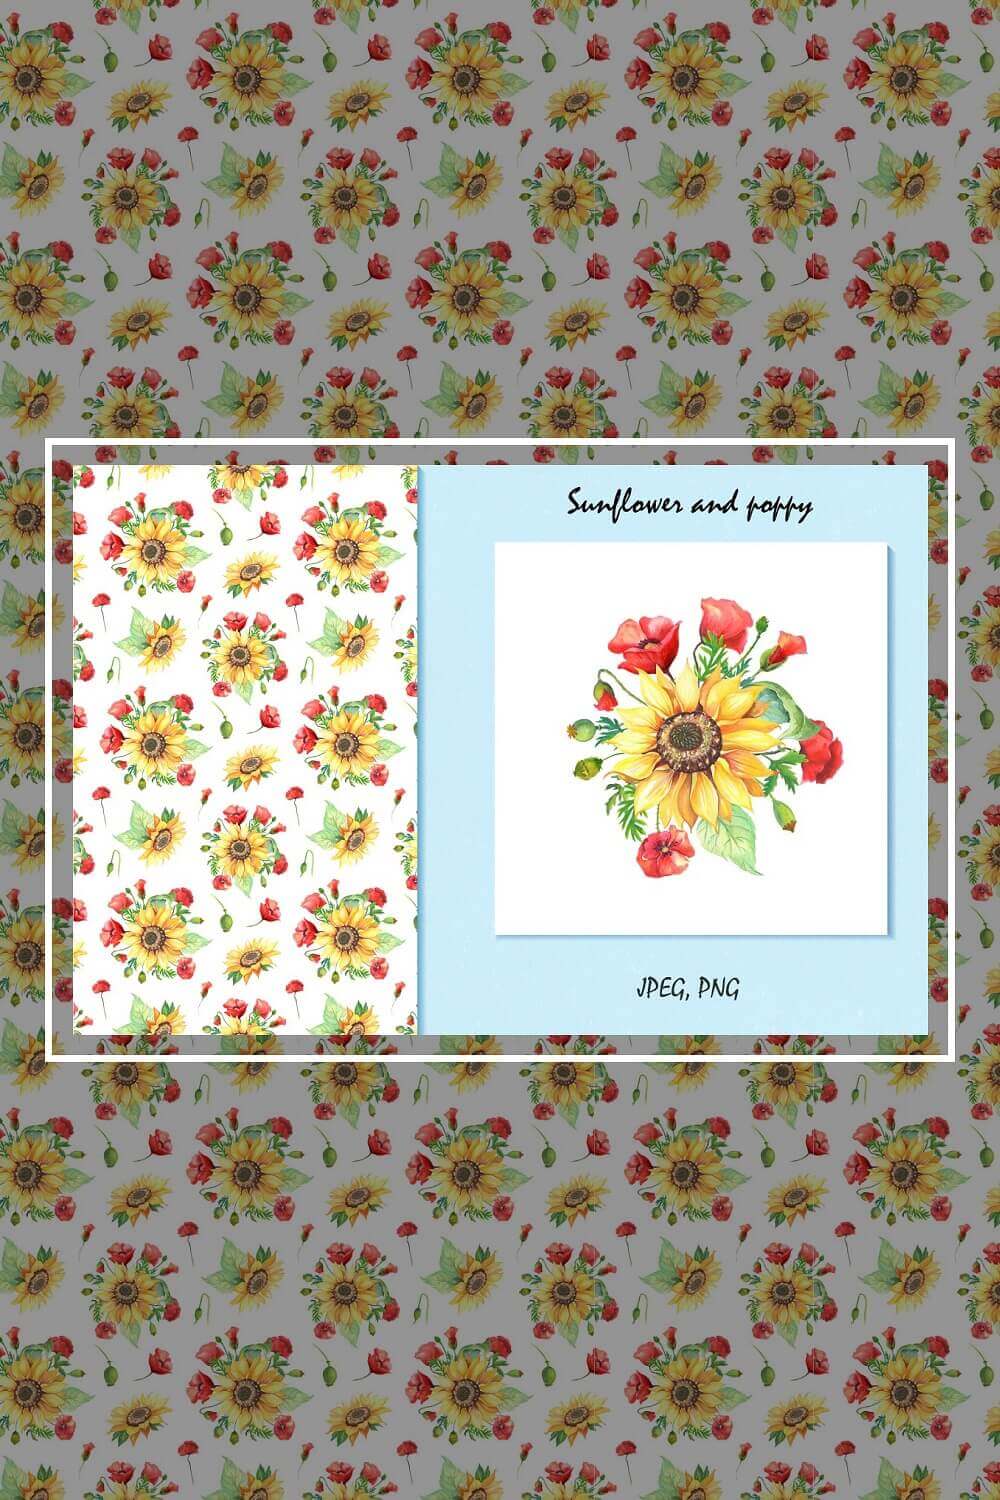 Blue postcard with a seamless pattern with sunflowers and poppies in watercolor in a white frame.